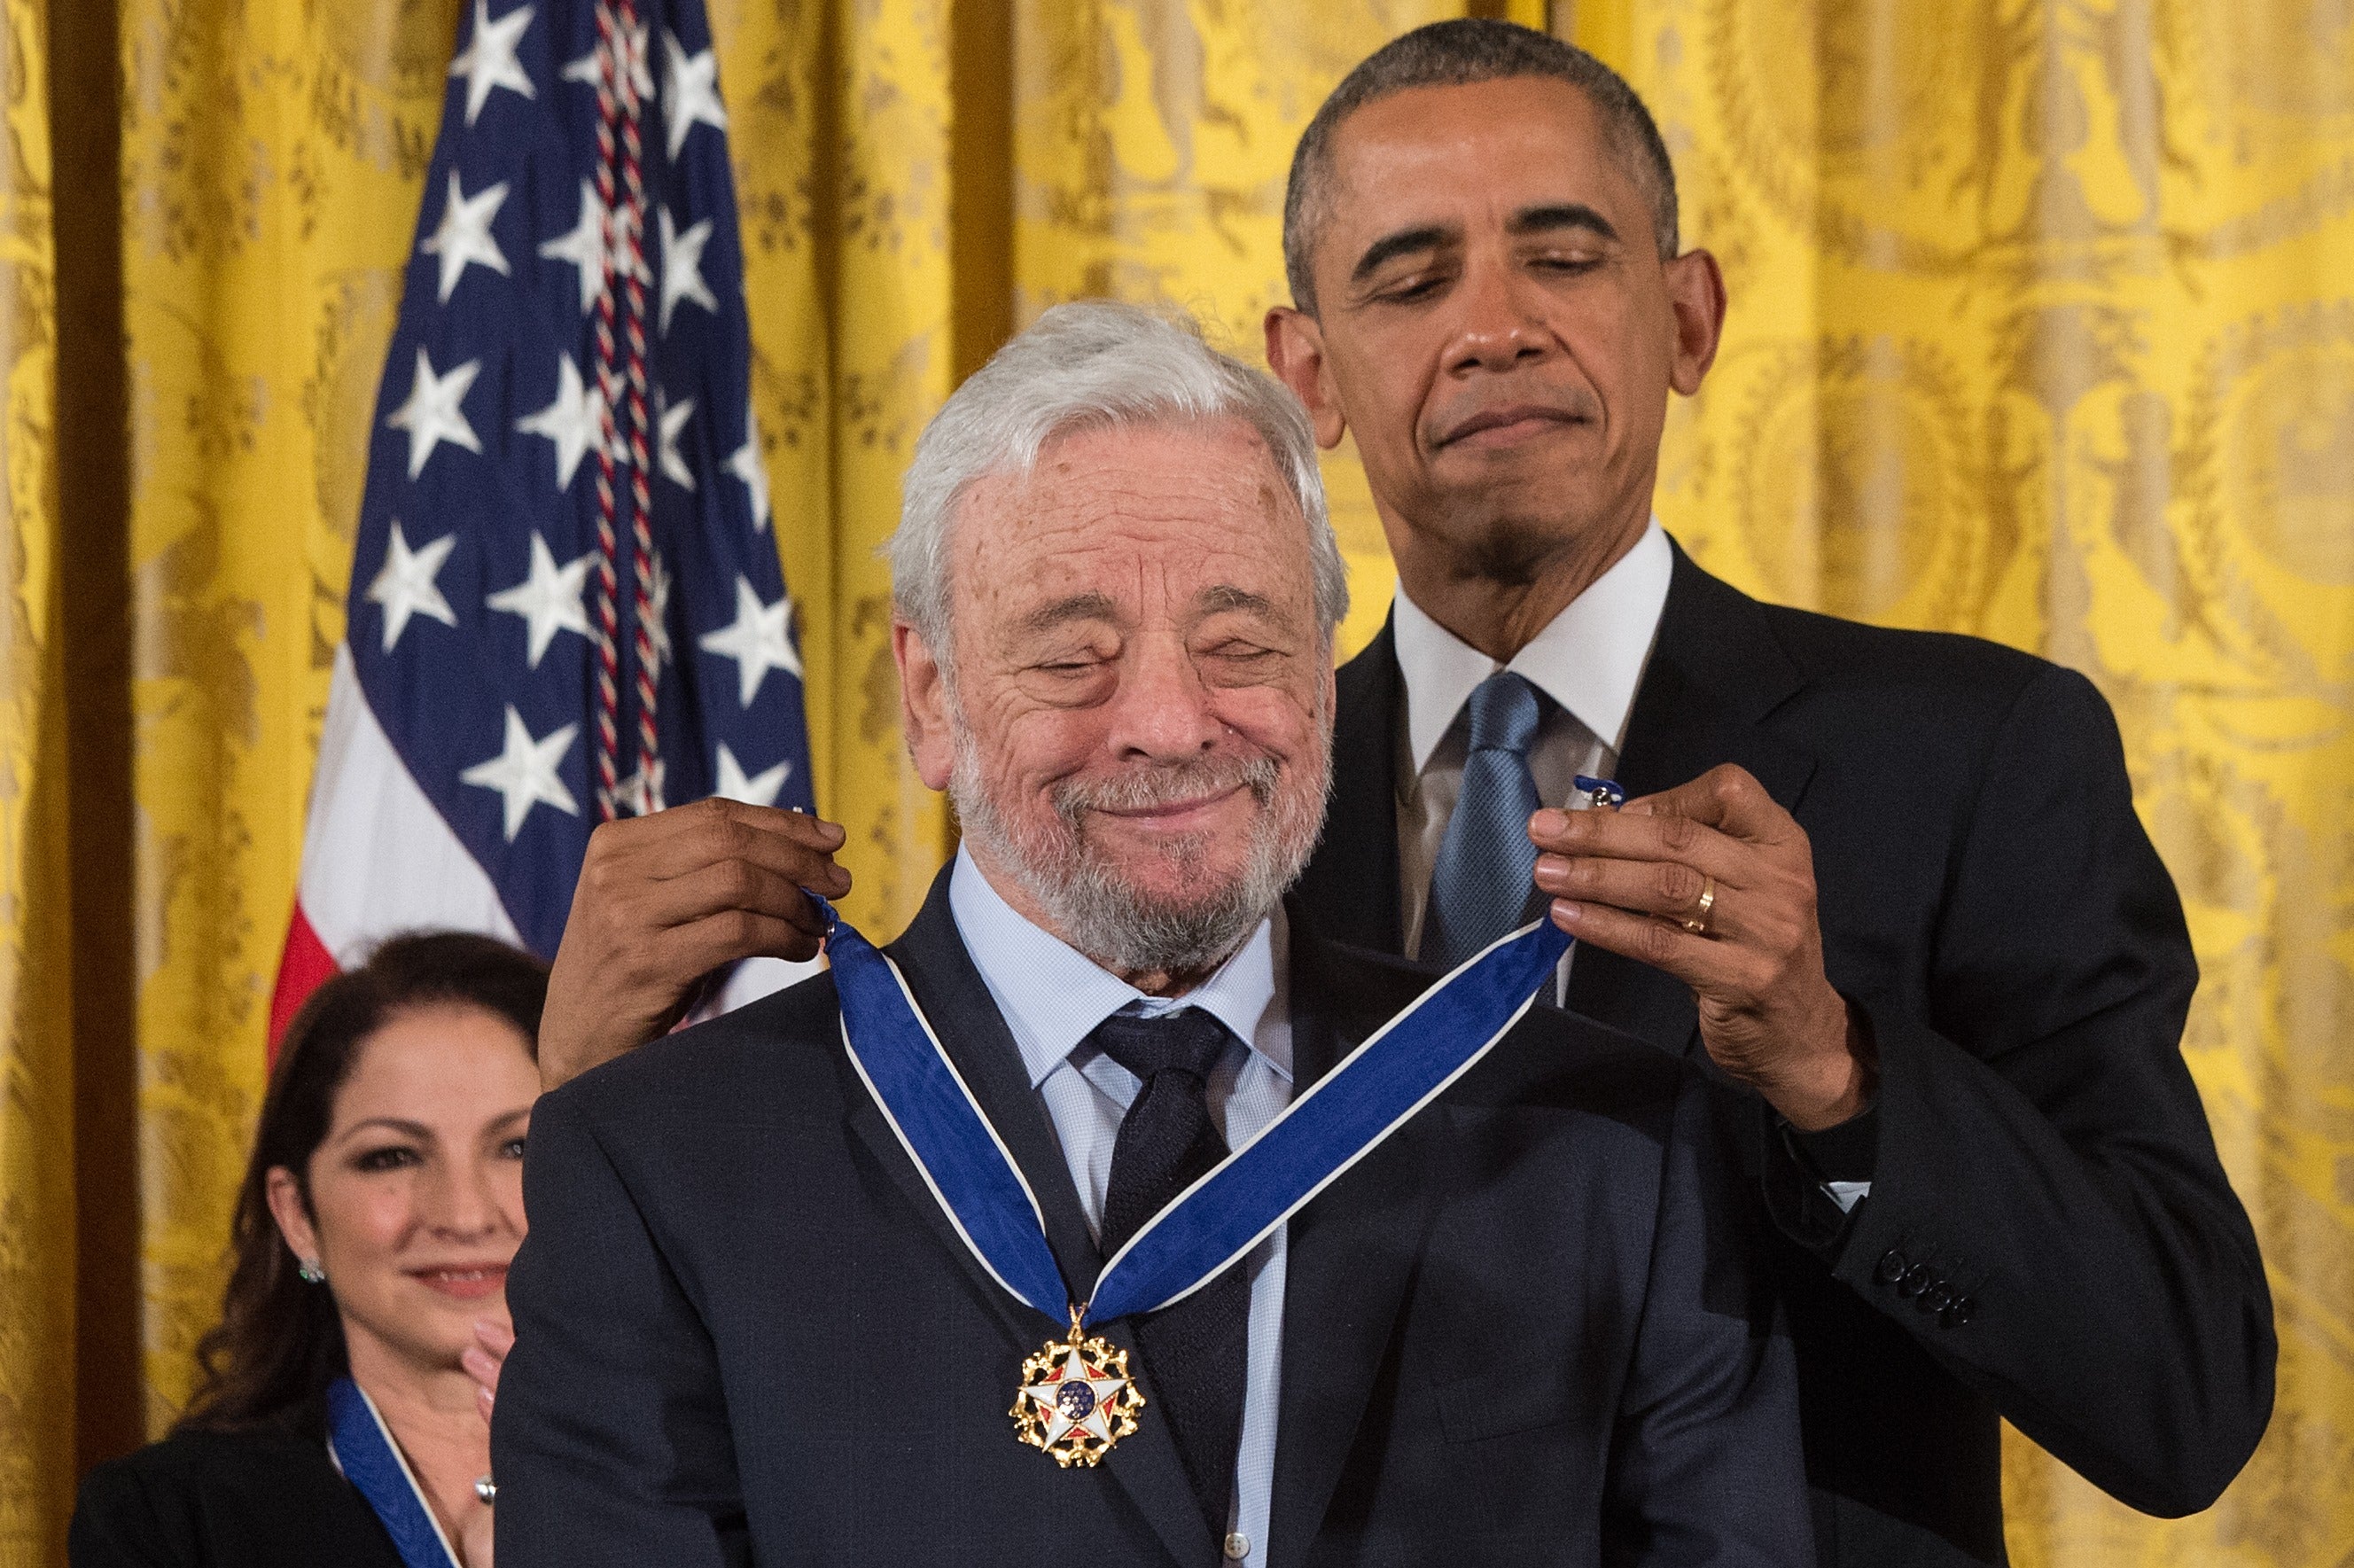 US President Barack Obama presents the Presidential Medal of Freedom to theater composer and lyricist Stephen Sondheim at the White House in Washington, DC, on November 24, 2015